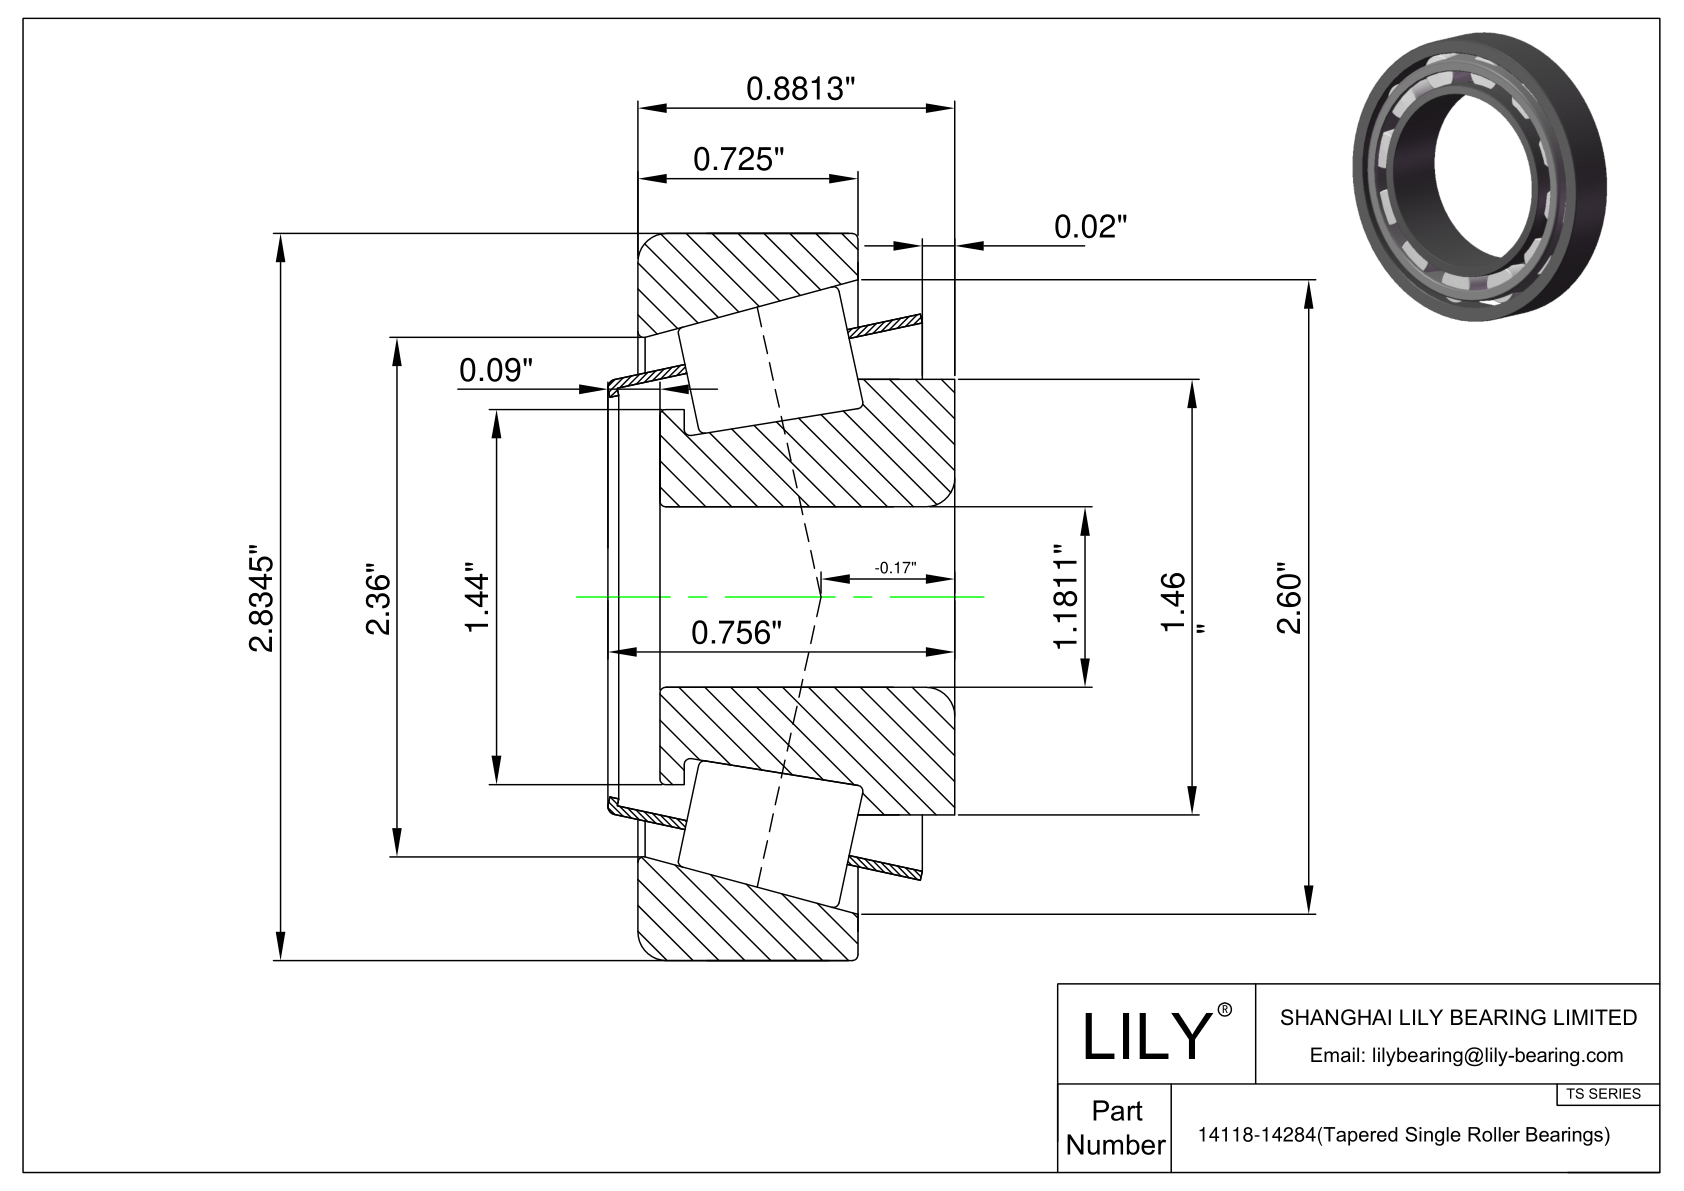 14118-14284 TS (Tapered Single Roller Bearings) (Imperial) cad drawing